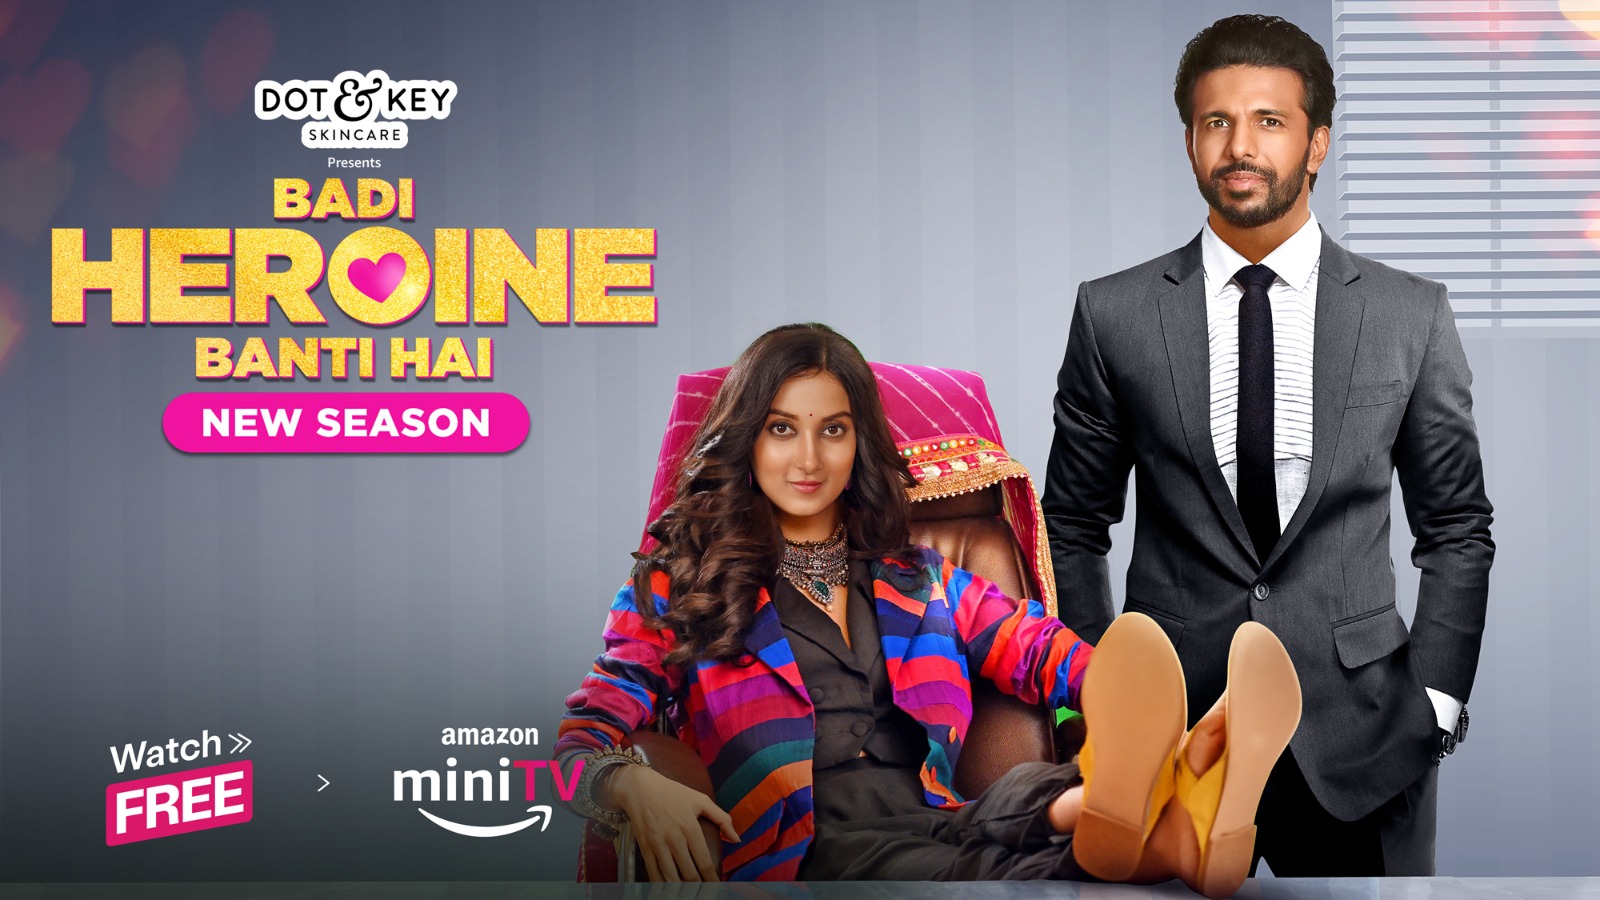 Badi Heroine Banti Hai Season 2 should be watched for a love story with twists and turns and drama galore!